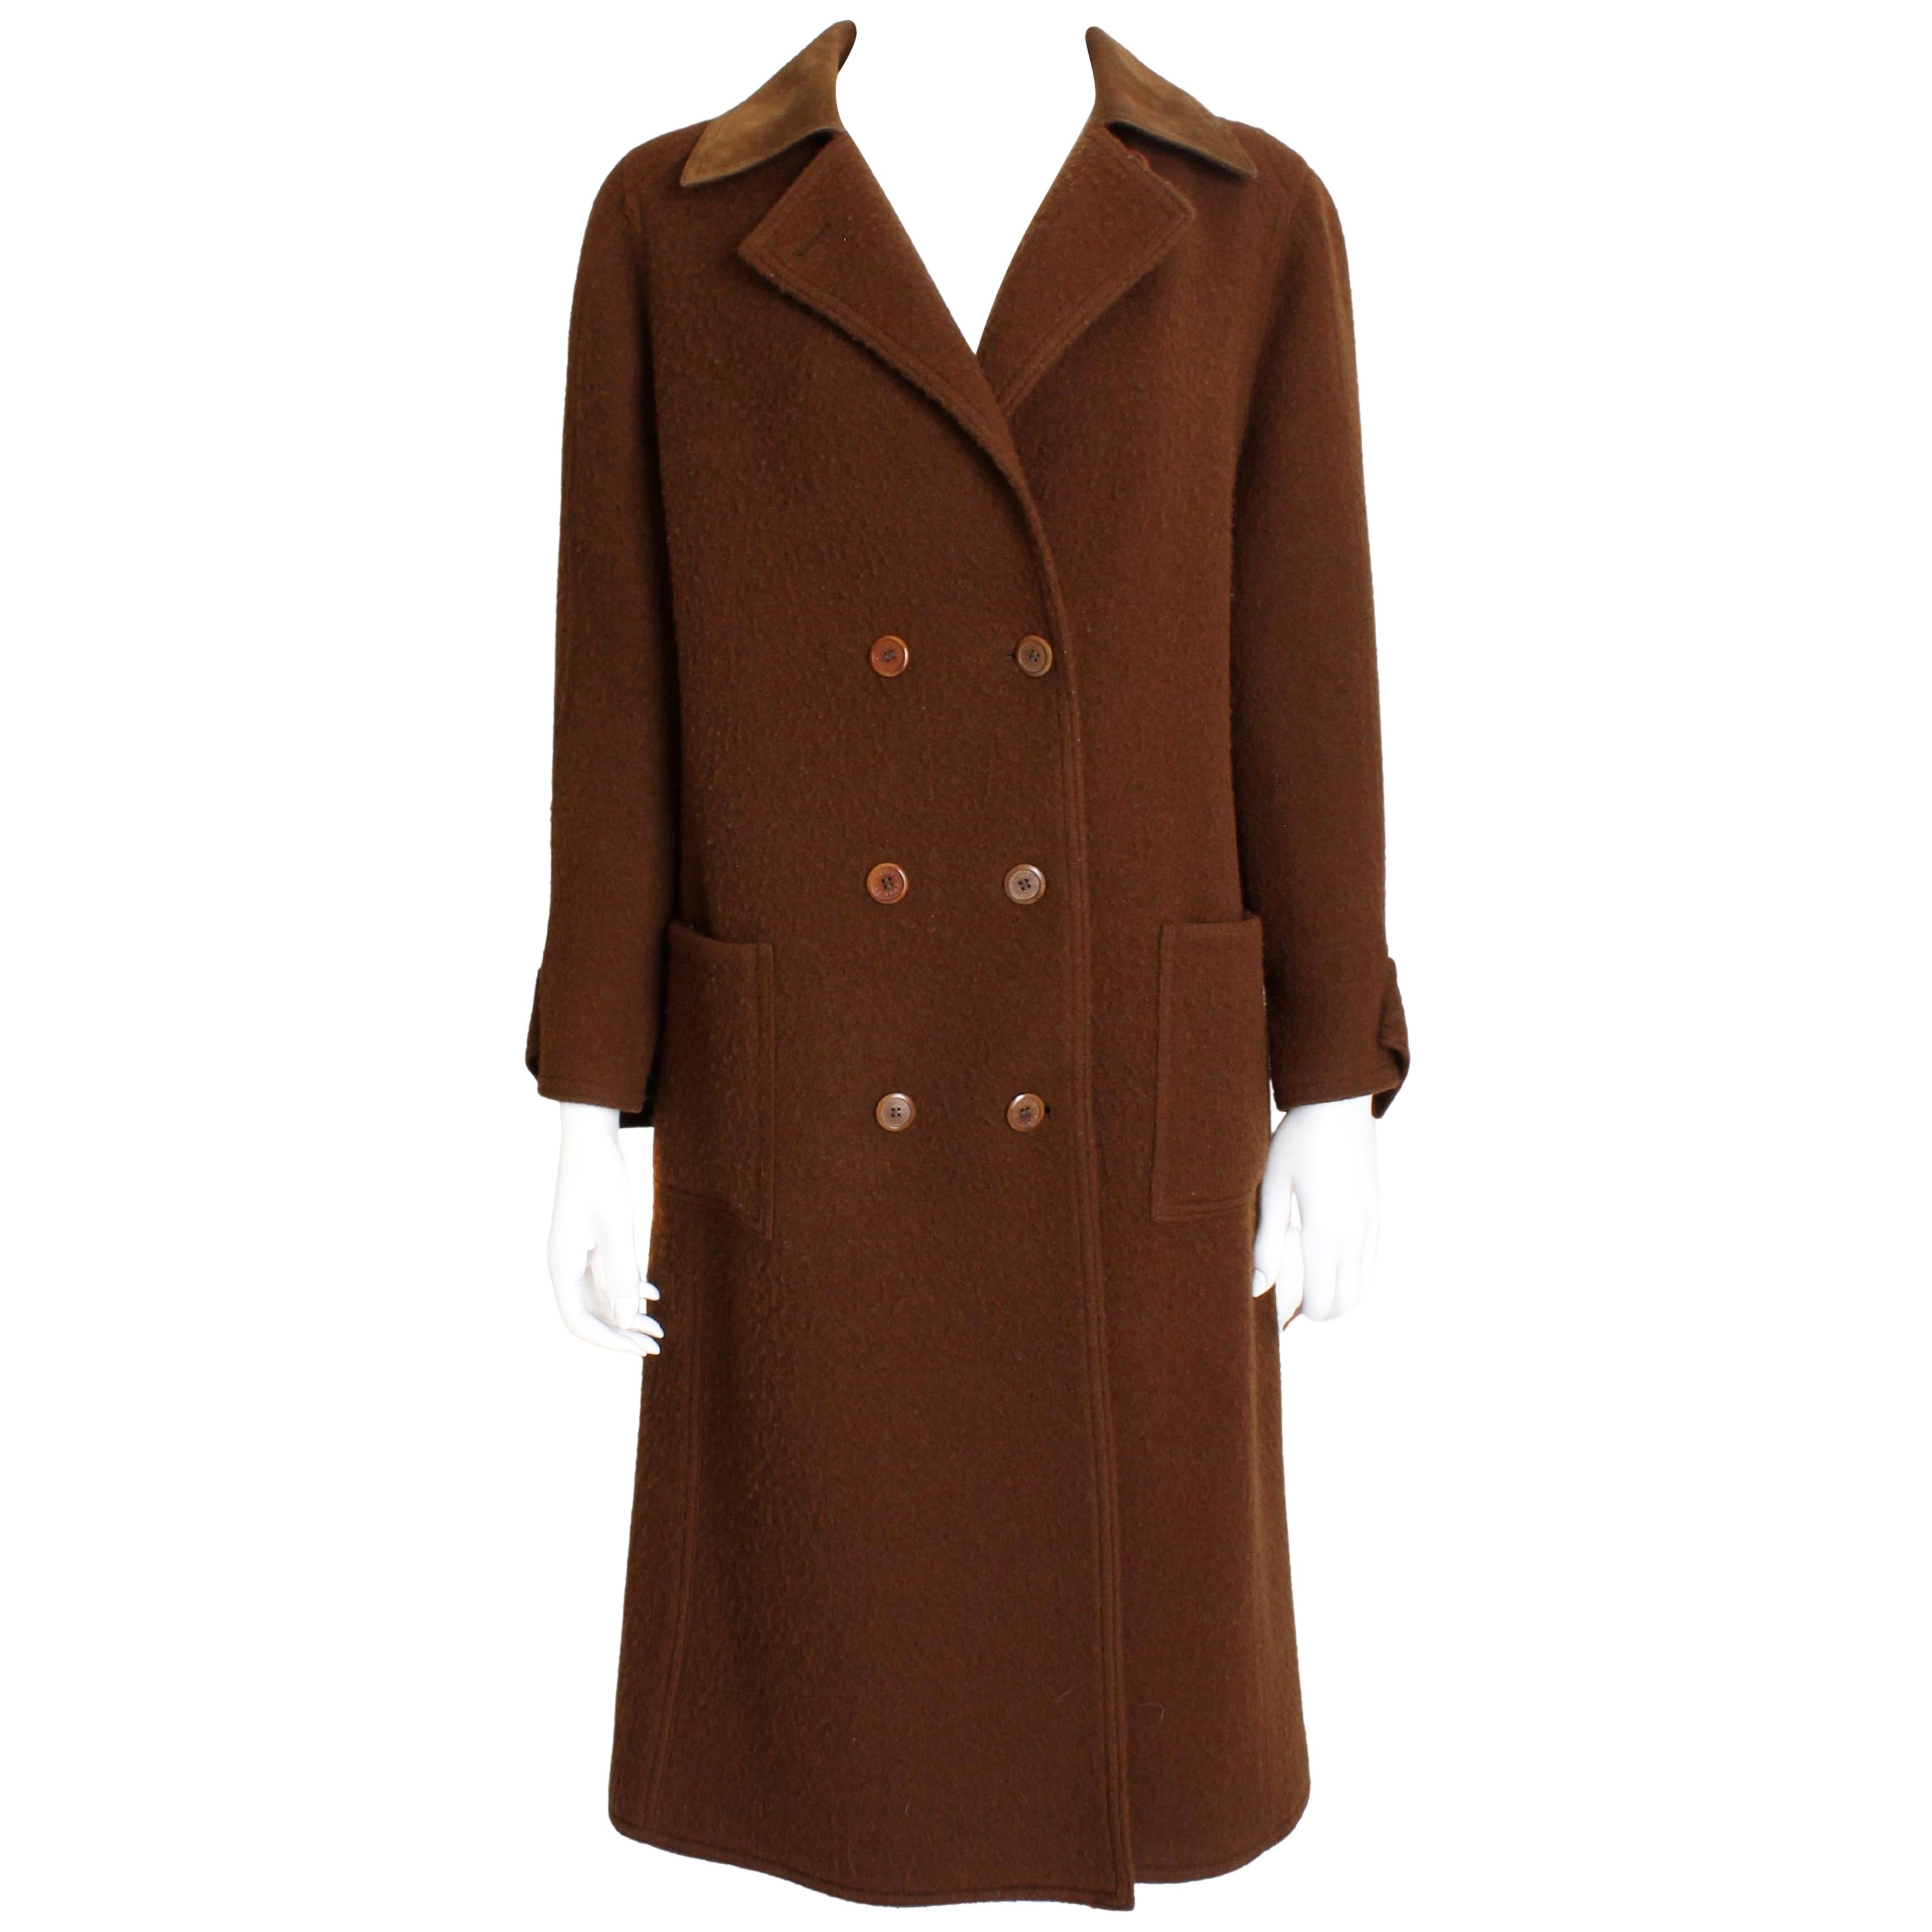 Hermes Brown Double Breasted Suede Leather Trim Trench Style Wool Coat, 1970s For Sale